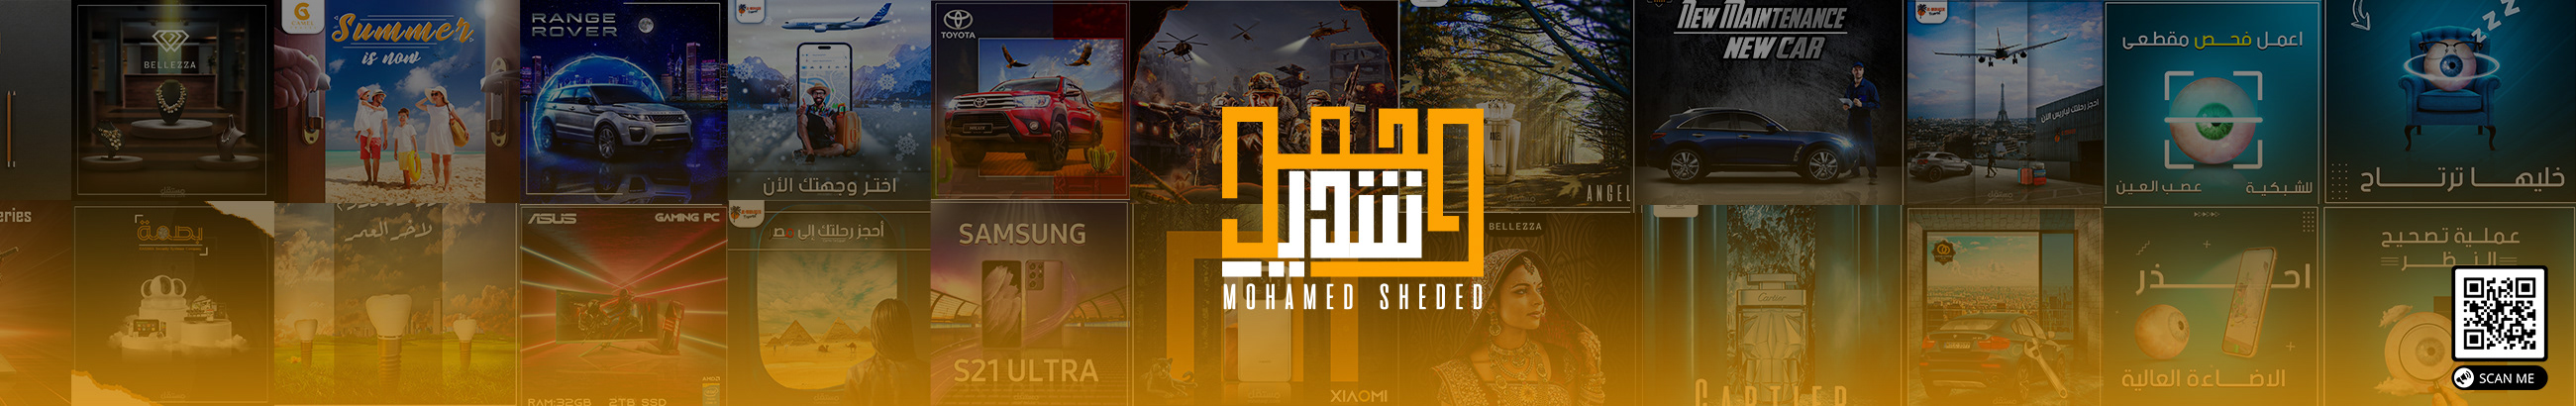 Profielbanner van Mohammed Sheded